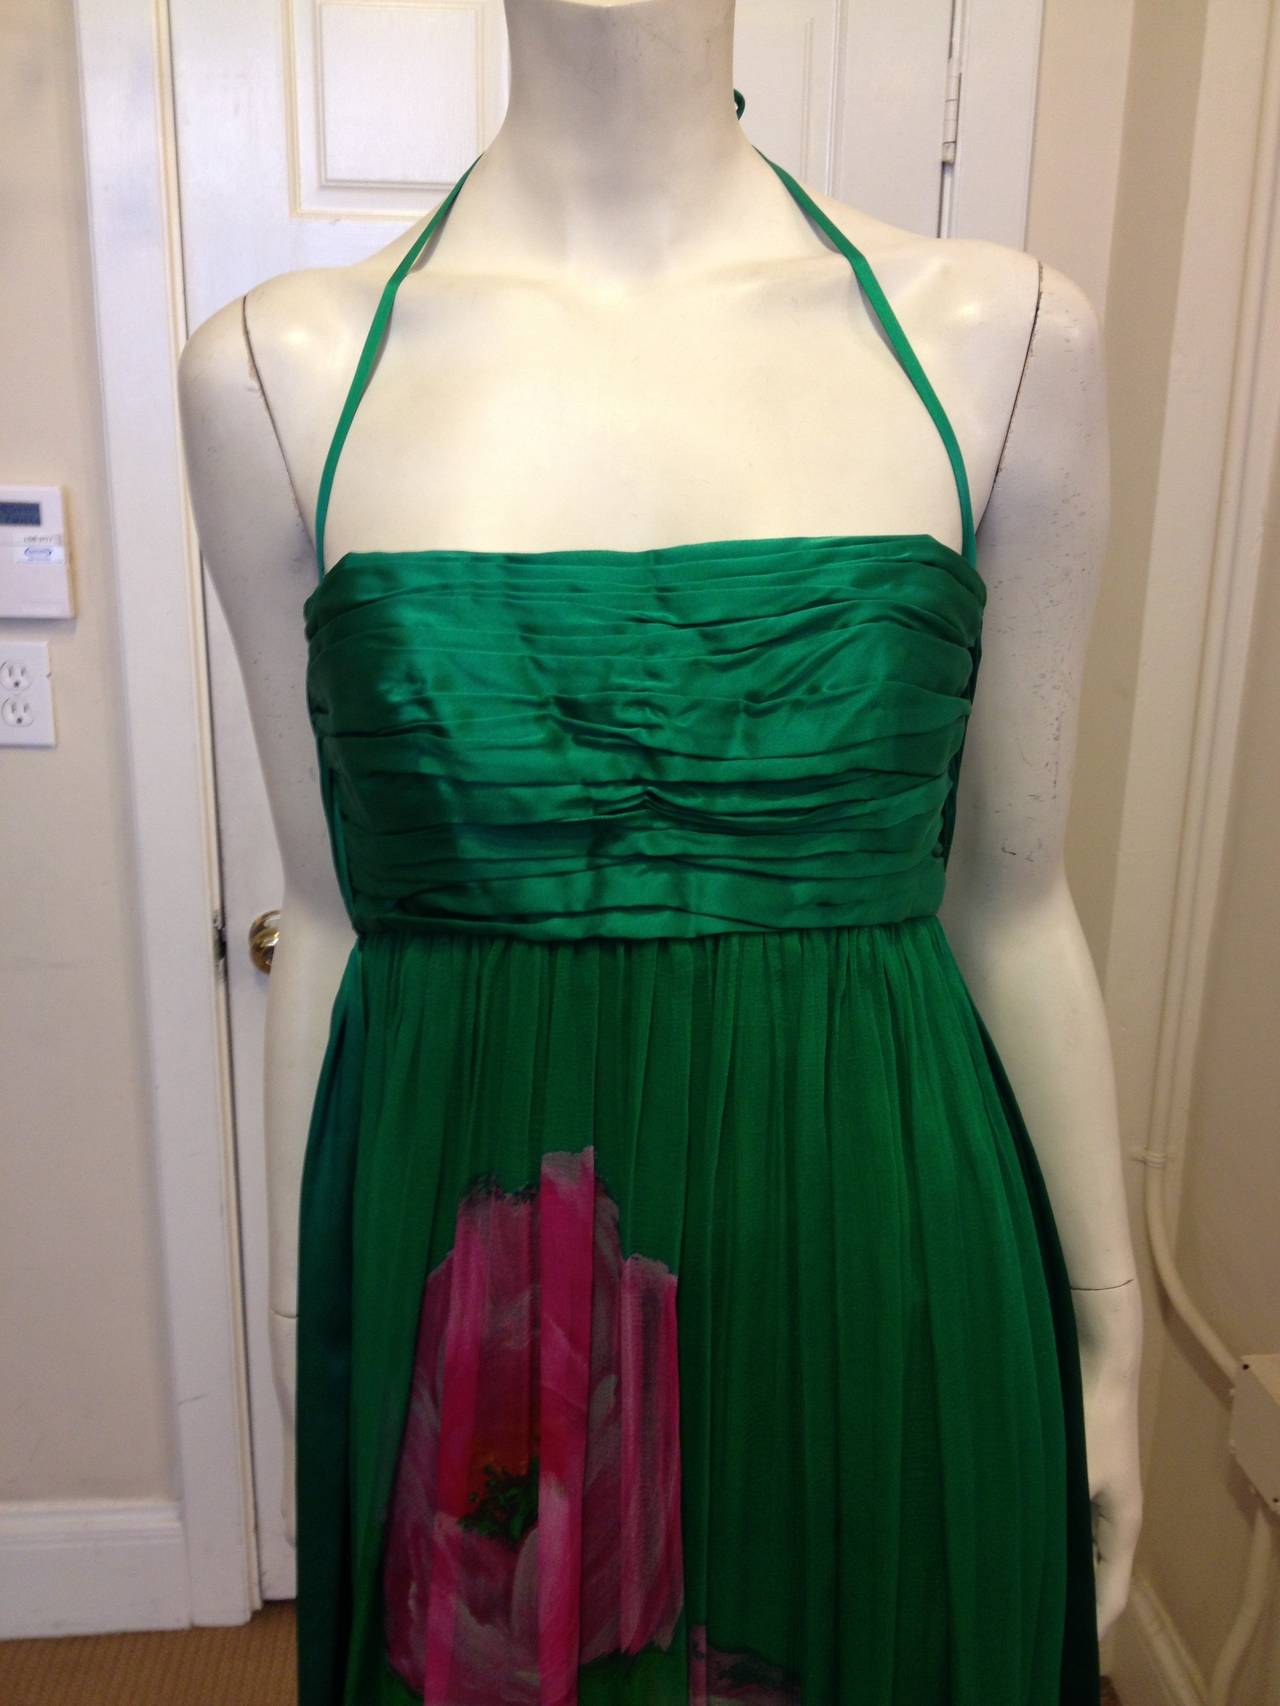 This amazing emerald green dress exemplifies all that made Galanos a favorite designer of Marilyn Monroe, Elizabeth Taylor and Jackie Kennedy, just to name a few.  The green chiffon drapes from the pleated, silk bodice  and the sexy, low cut back is